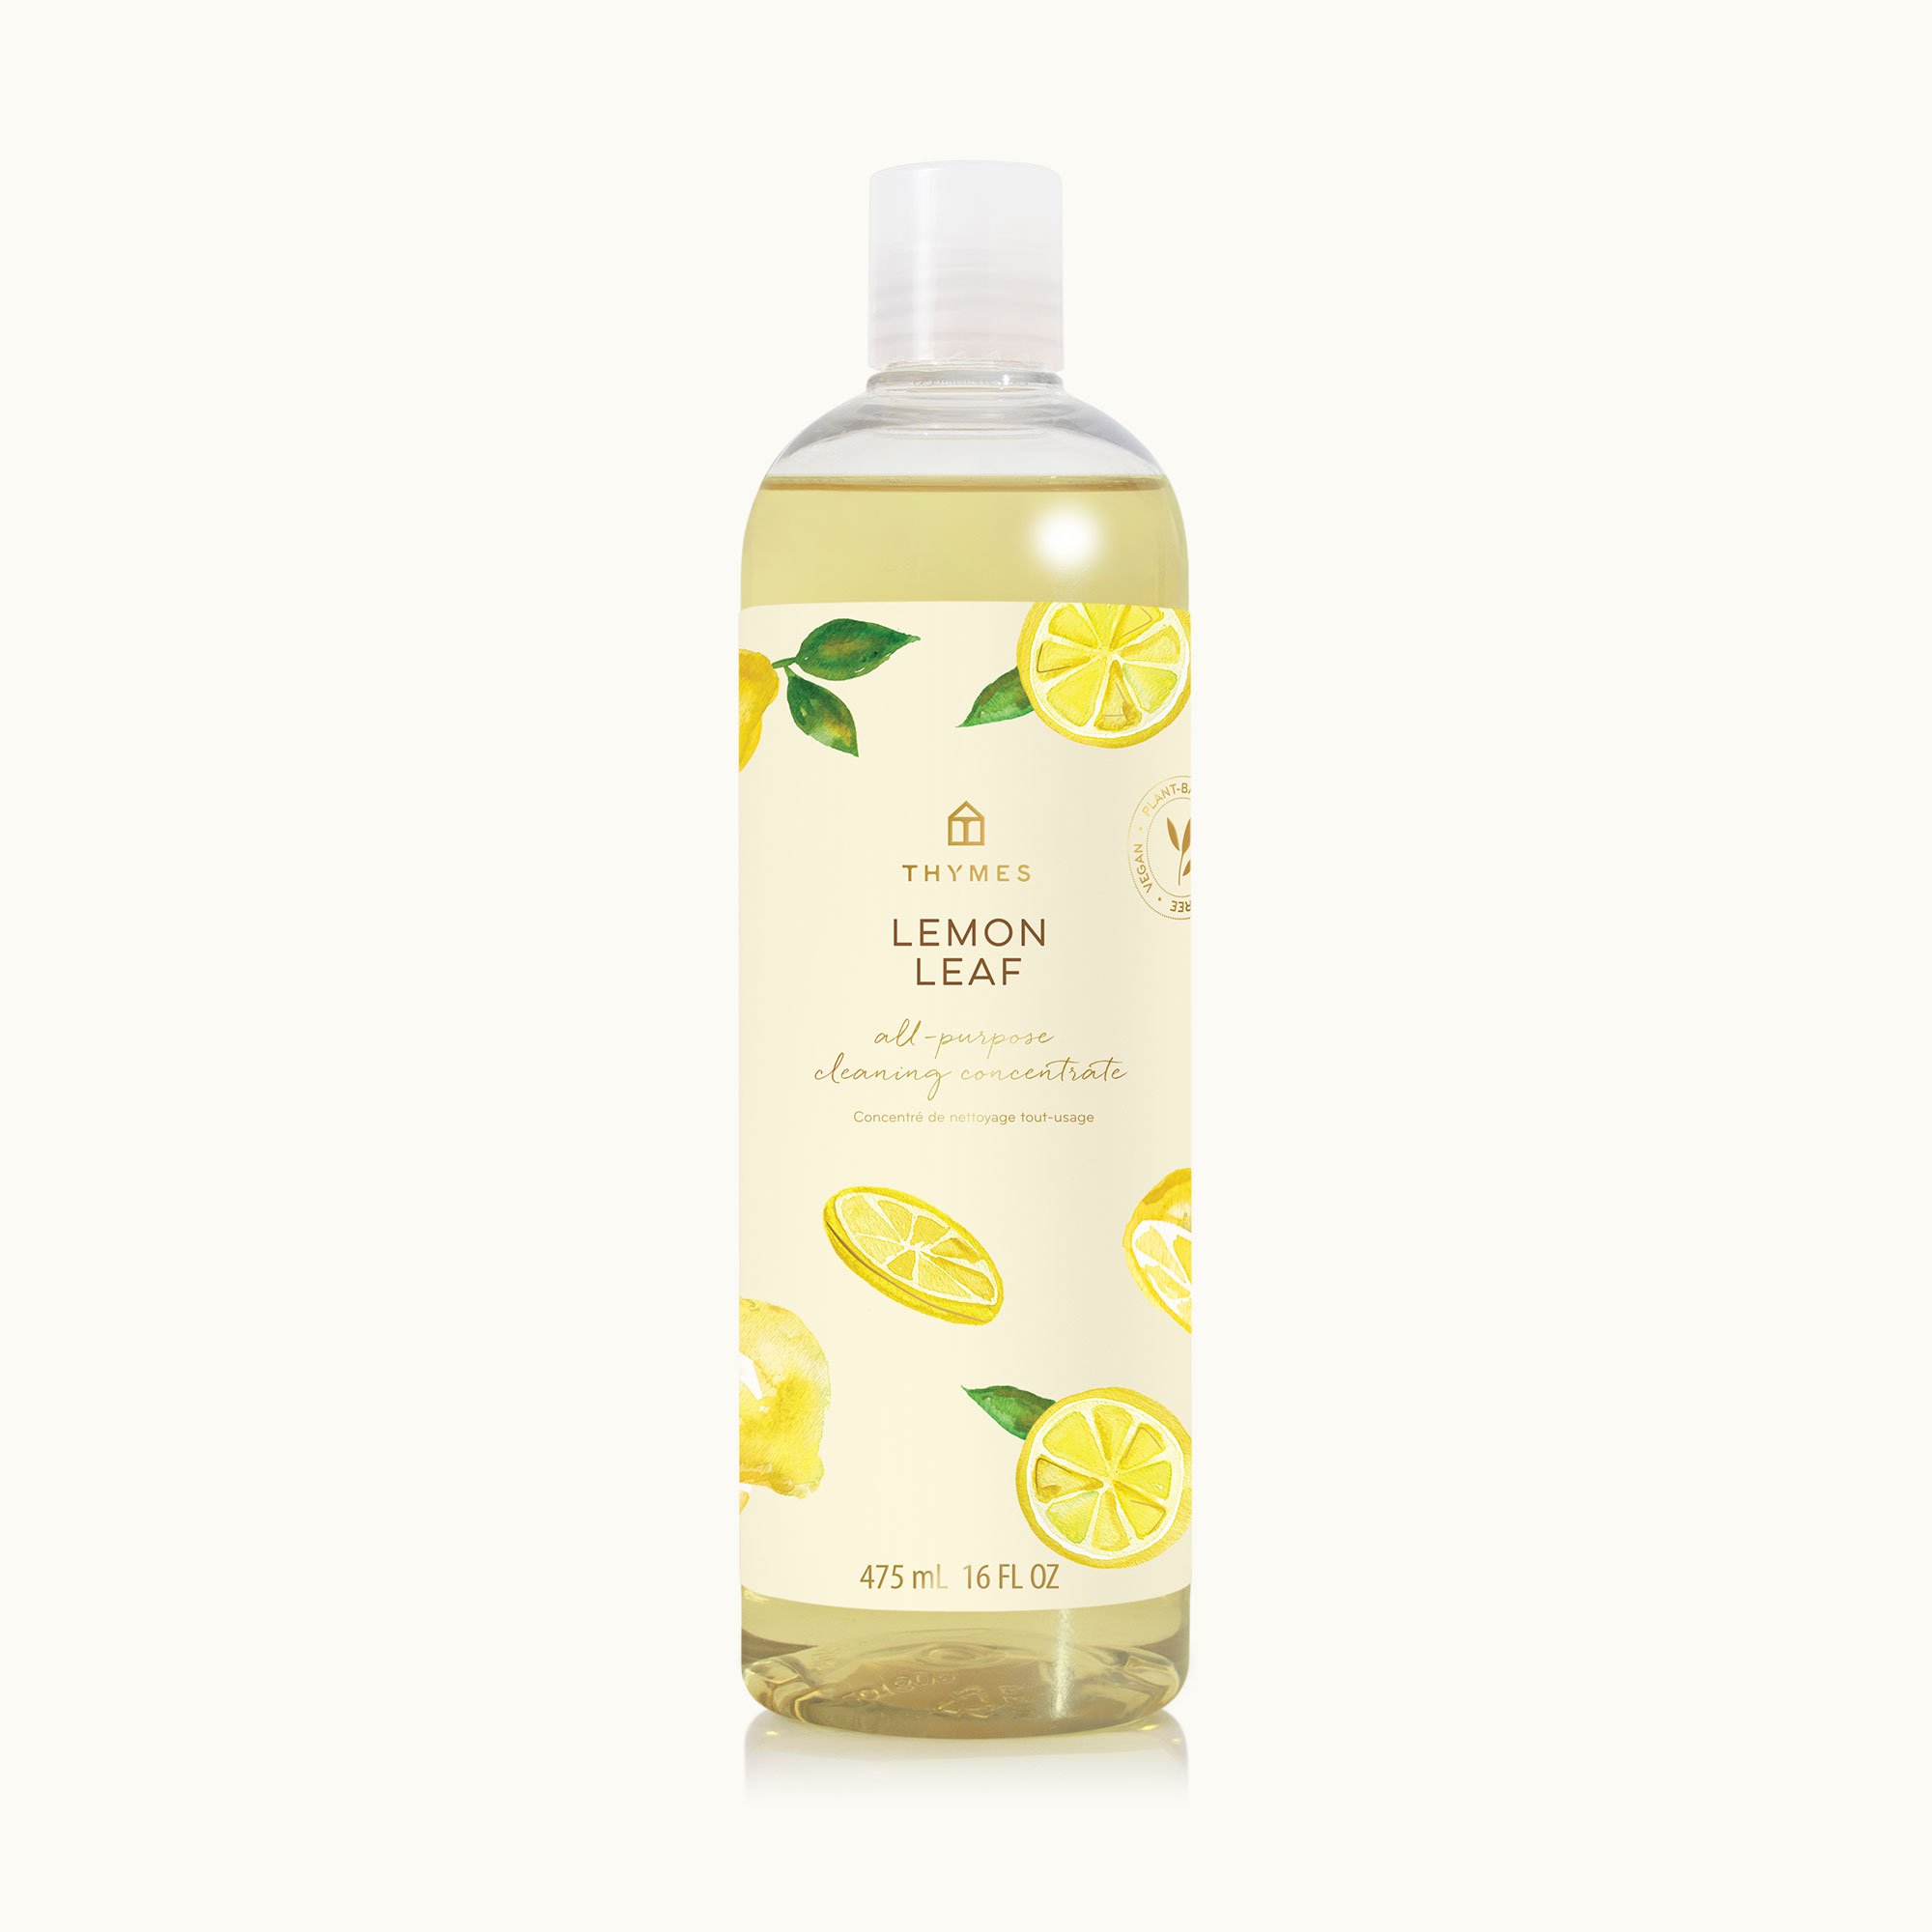 https://www.thymes.com/on/demandware.static/-/Sites-products-thymes/default/dwde918b95/images/products/Cleaning%20Concentrate/thymes-lemon-leaf-all-purpose-cleaning-concentrate-0731740507.jpg